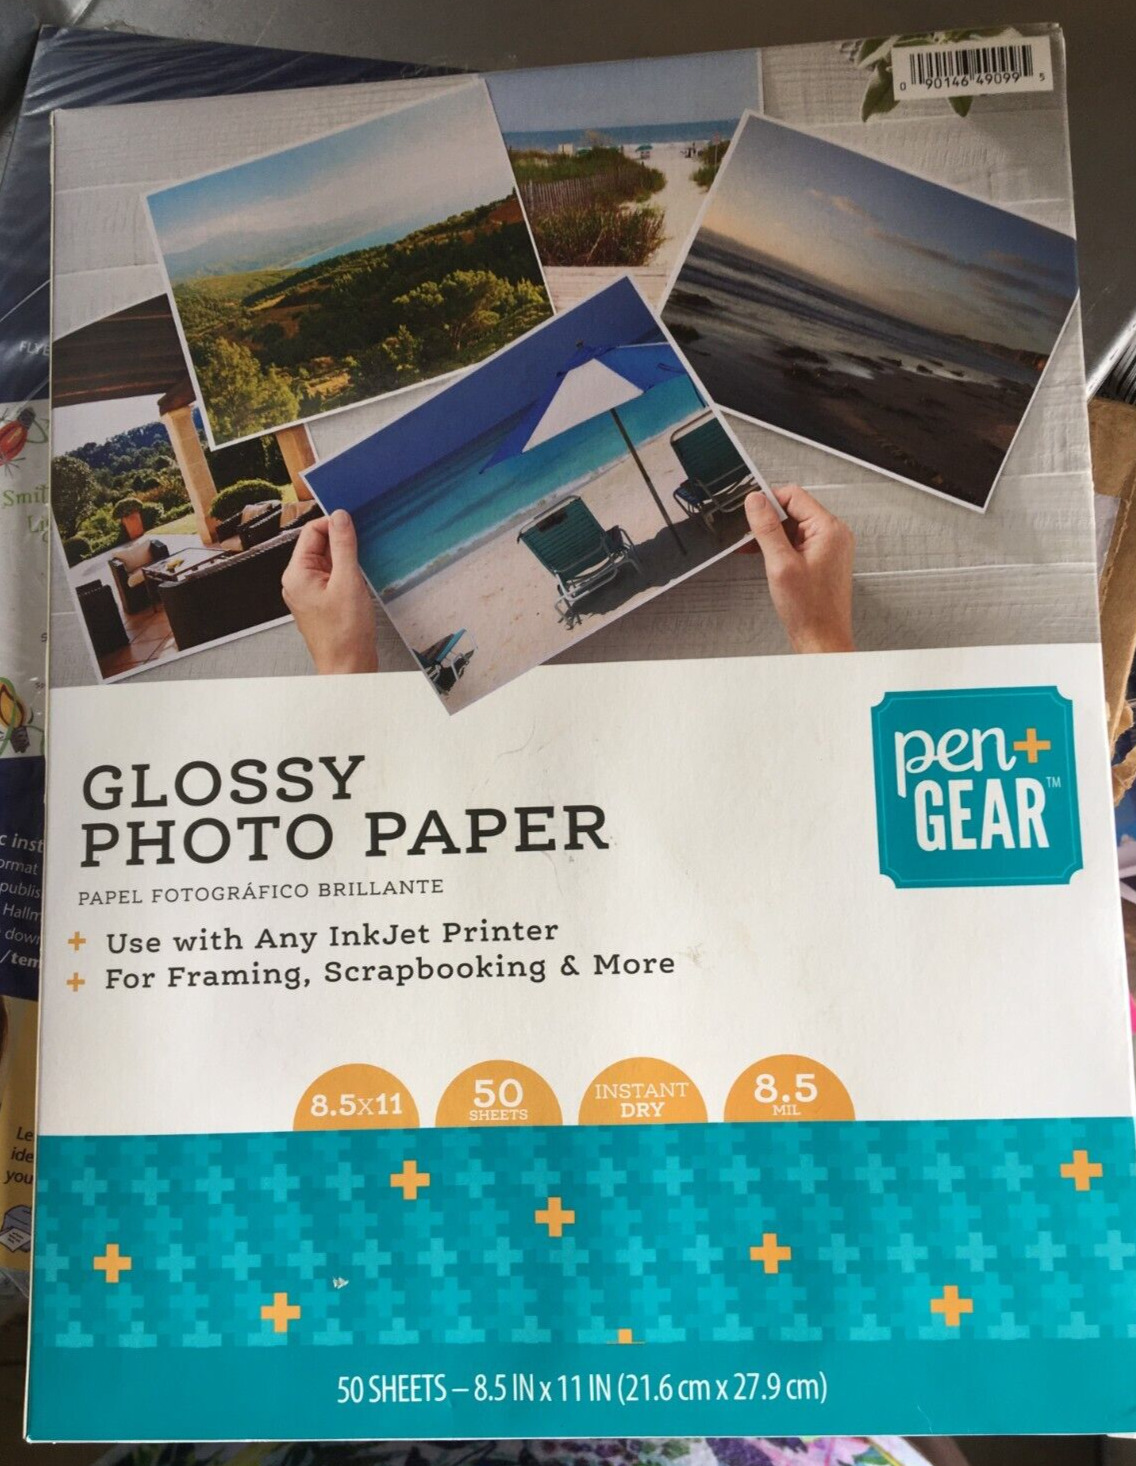 Pen Gear Glossy Photo Paper 50 Sheets For Inkjet Printer Scrapbooking & More New